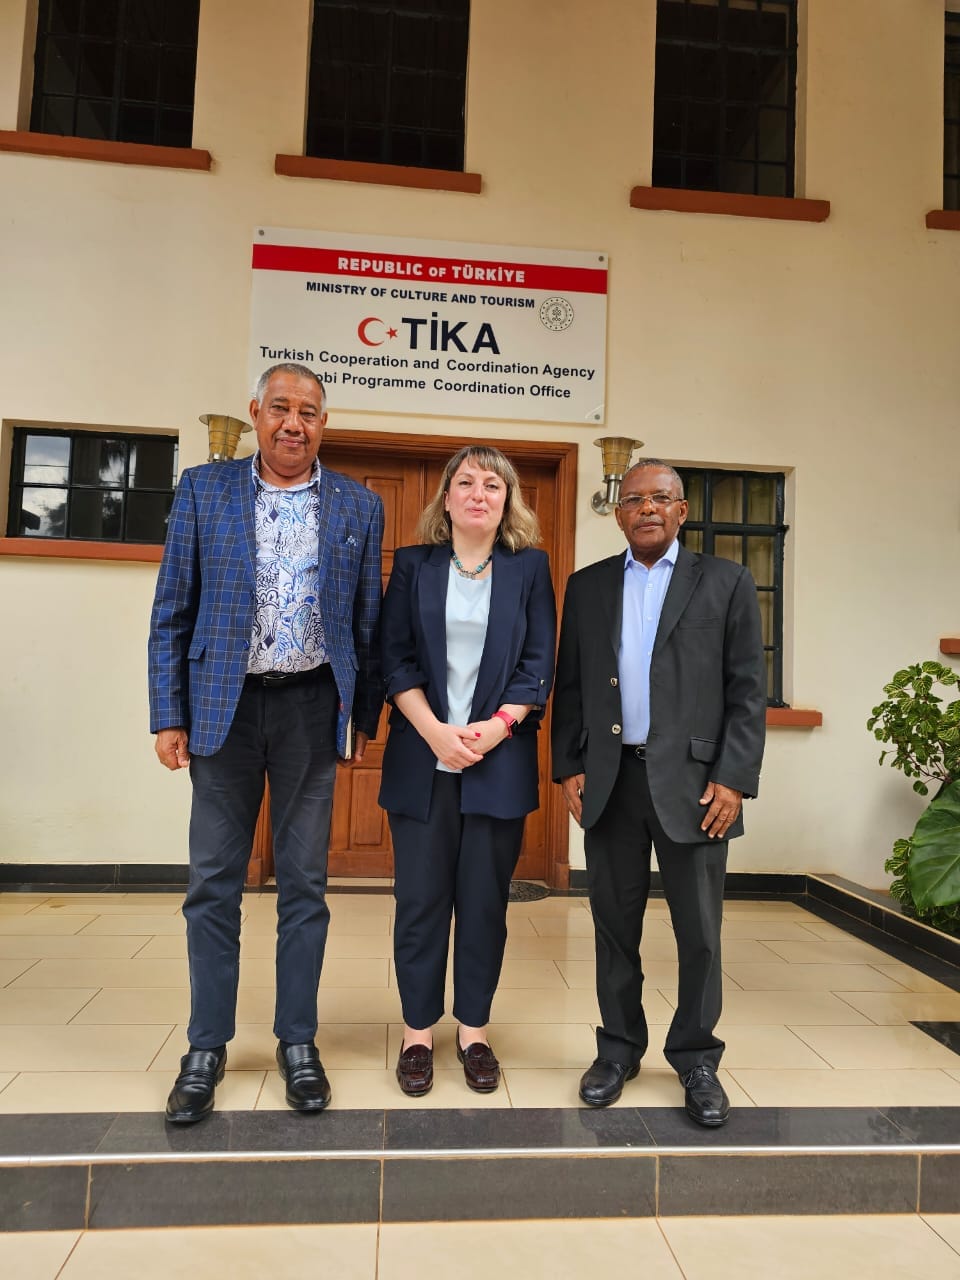 GOVERNOR TIMAMY ENGAGES WITH TURKISH ORGANIZATION (TIKA)ON HOW THEY CAN SUPPORT LAMU IN SOCIAL & ECONOMIC DEVELOPMENT